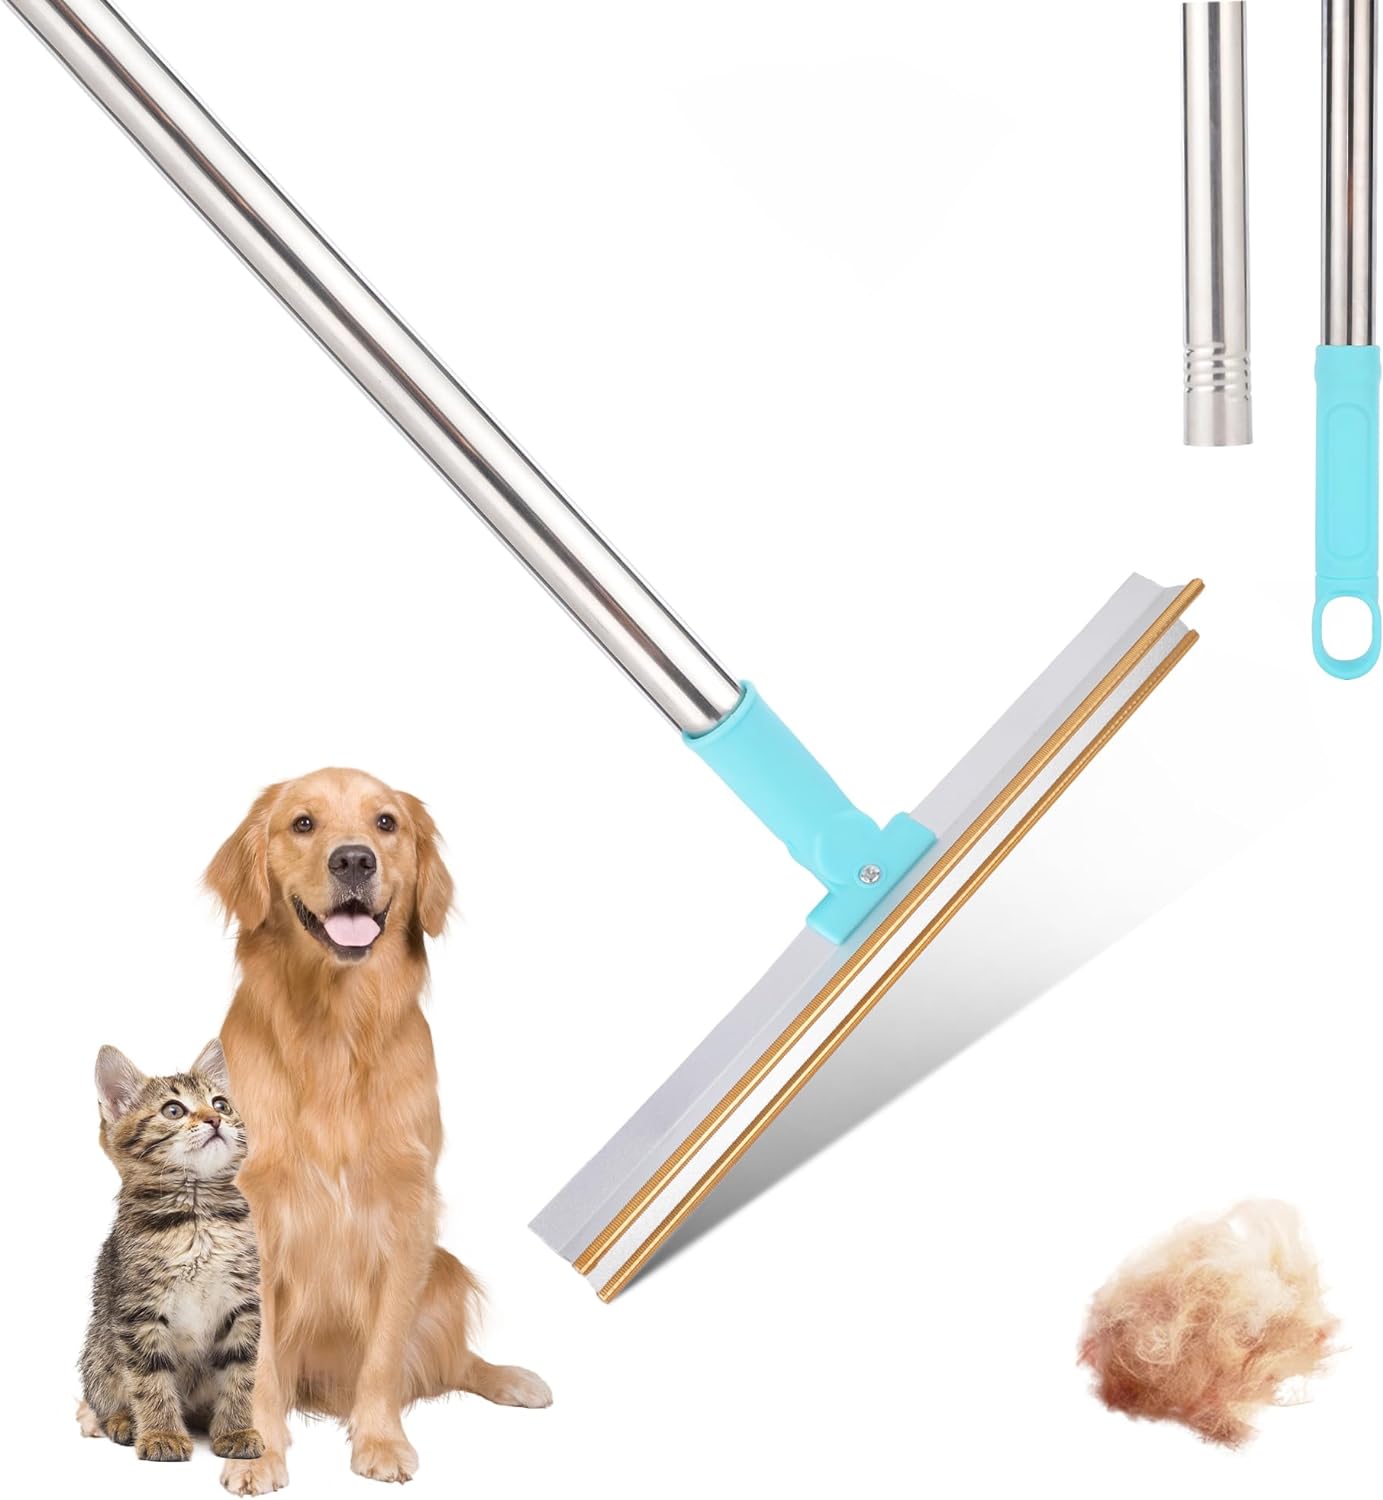 Pet Hair Remover, Large Carpet Rake, Pet Hair Remover with Metal Fabric Edge Design, Removable and retrofittable，Hair Shedding Cleaner Tool for Fur Rug, Stairs, Reusable Pet Hair Broom(Telescoping)